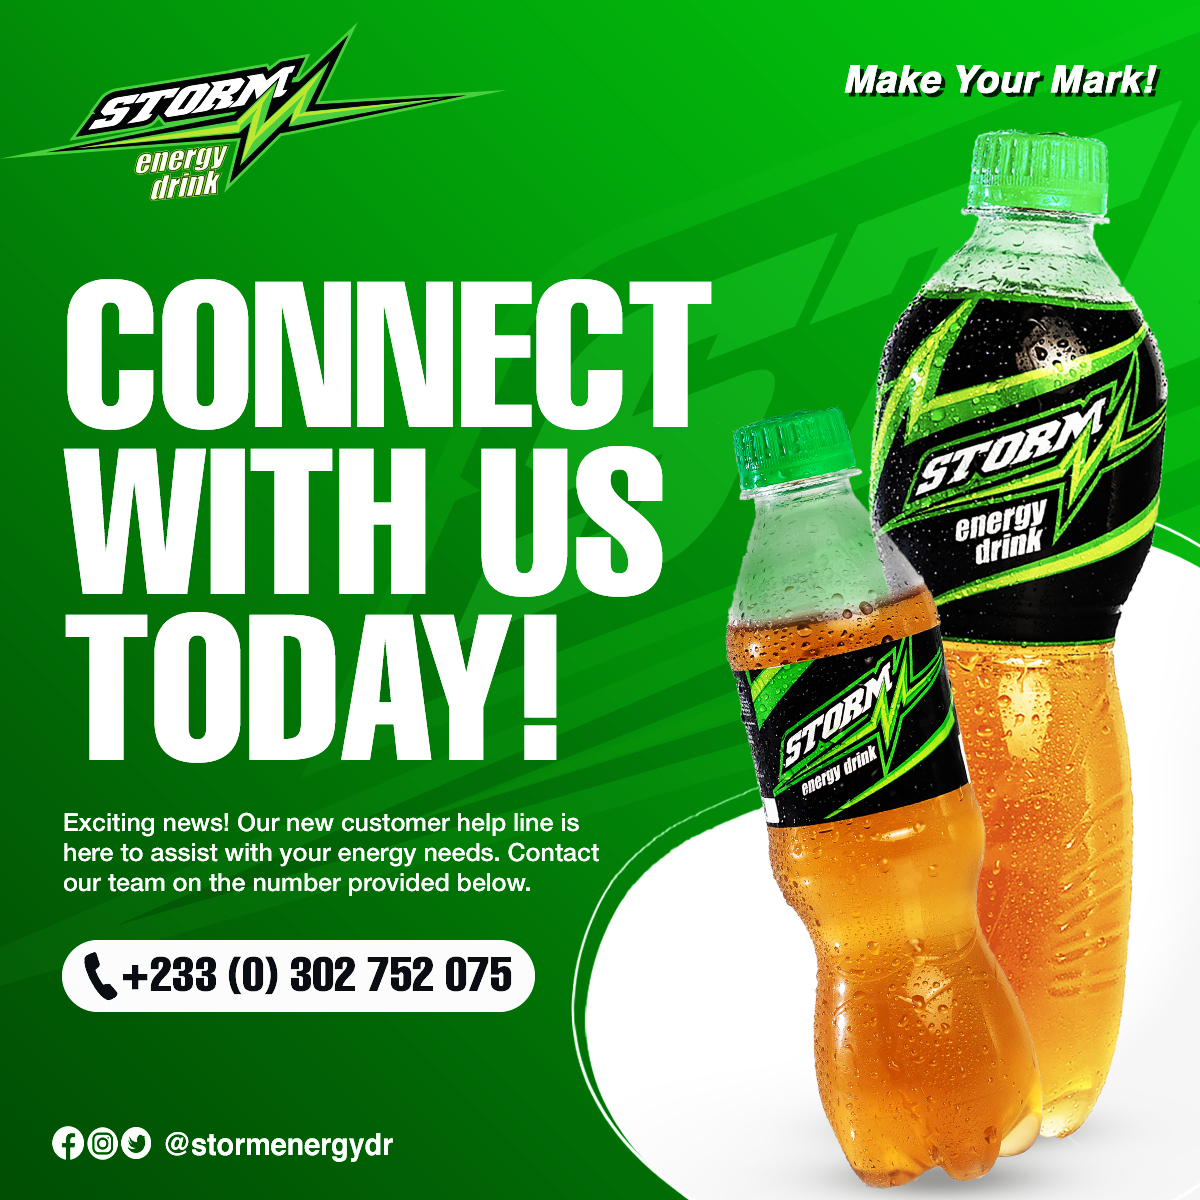 Our official customer helpline is here for all your energy needs. Contact us on +233 (0) 302 752 075 for your inquiries and orders. #UnleashTheStorm #TheX #success #motivation #BBNaija #stormenergydrink #GMB2023 #energyboost #motivationmondays